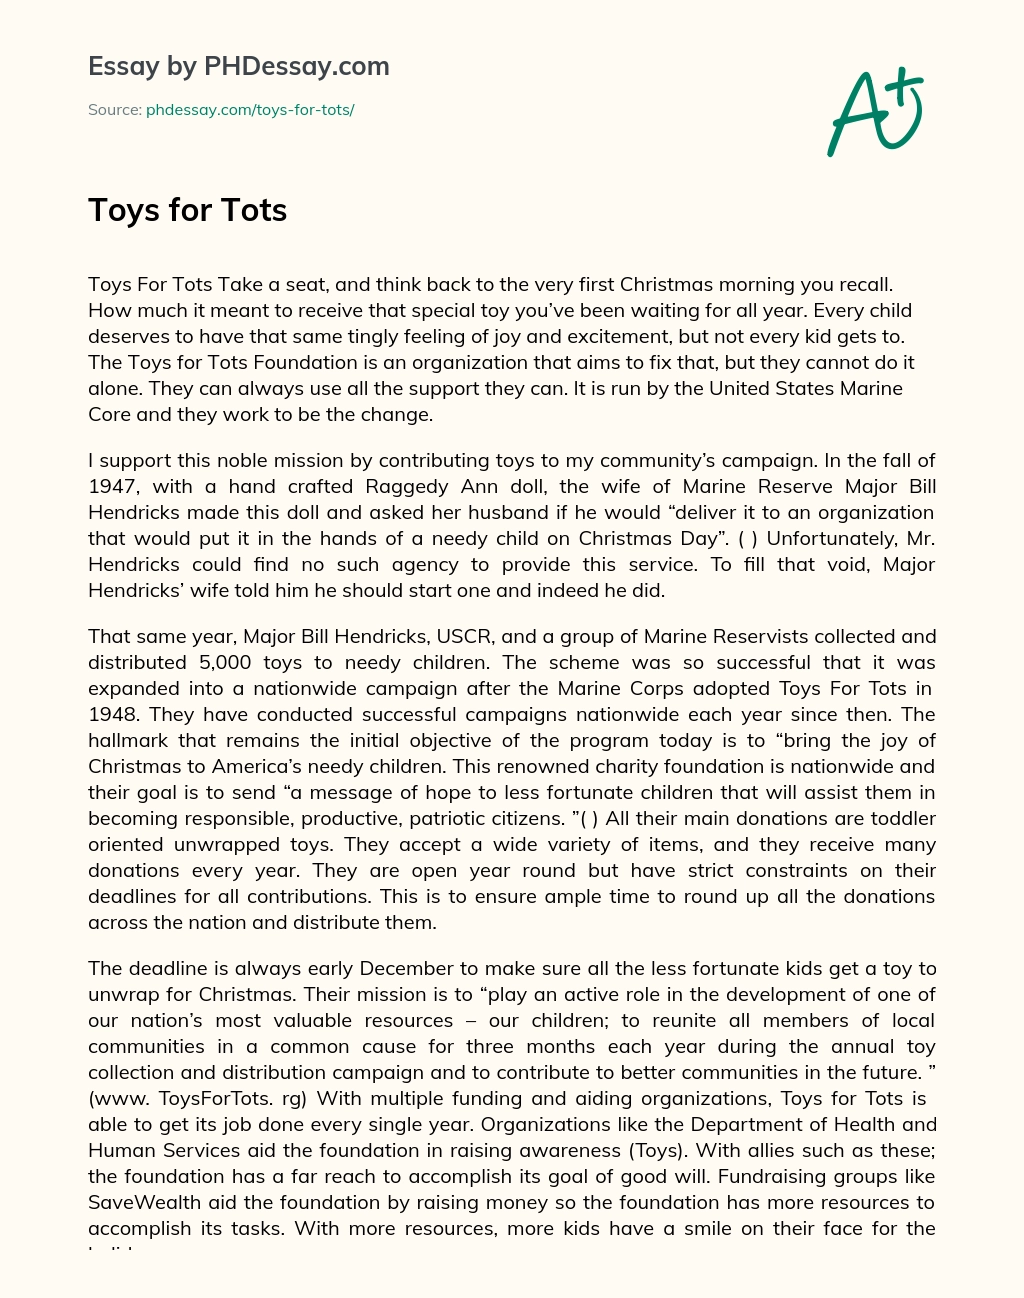 Toys for Tots essay